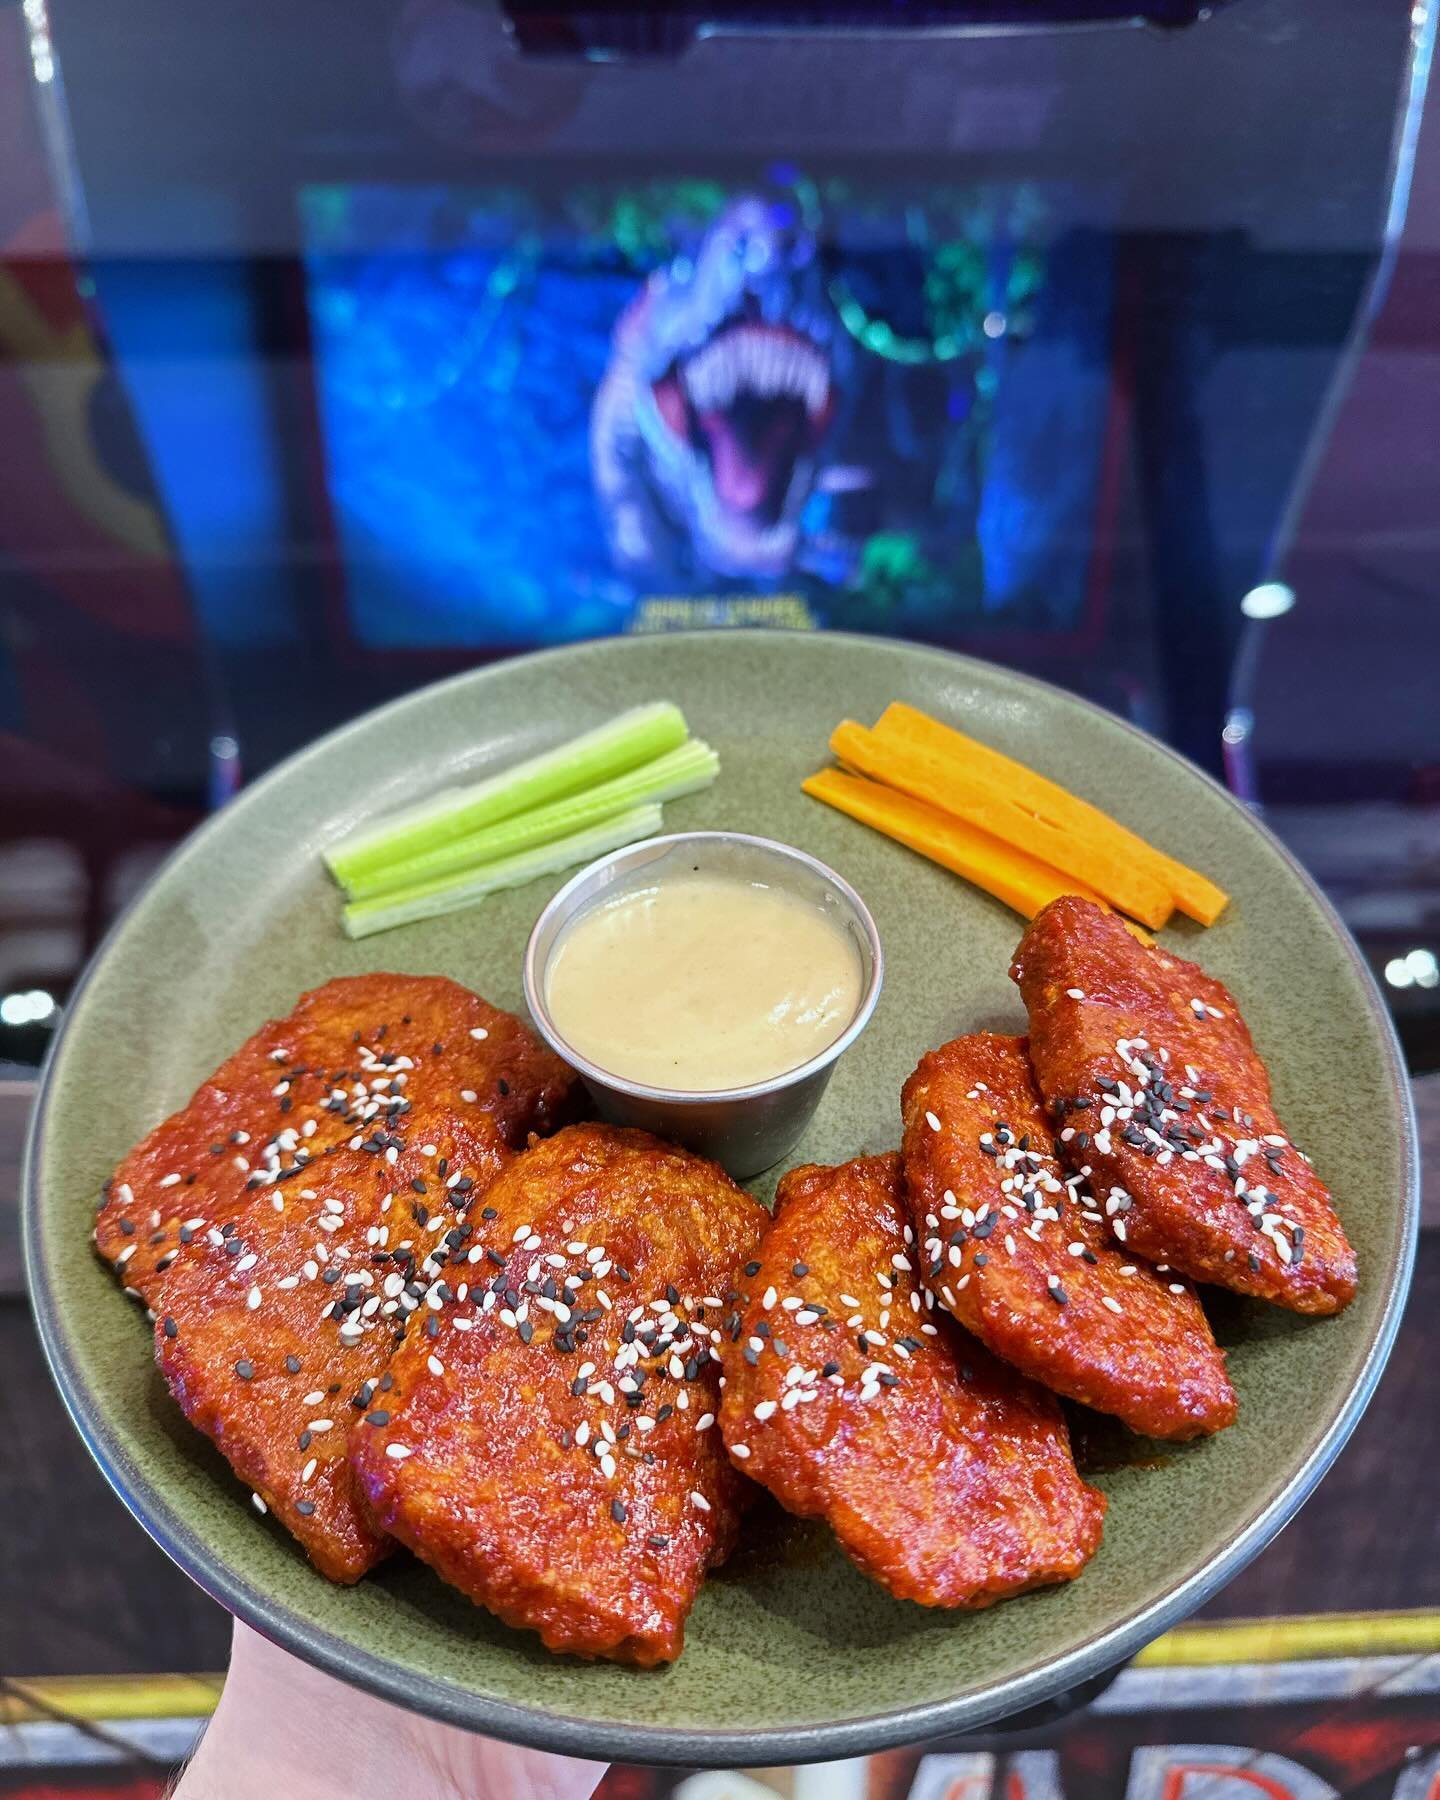 It&rsquo;s Wing Wednesday and that means a new flavor: Gochujang wings!!

These seitan wings are smothered in Gochujang sauce topped with sesame seeds and served with a creamy tahini dipping sauce! 

But don&rsquo;t worry we still have all the classi